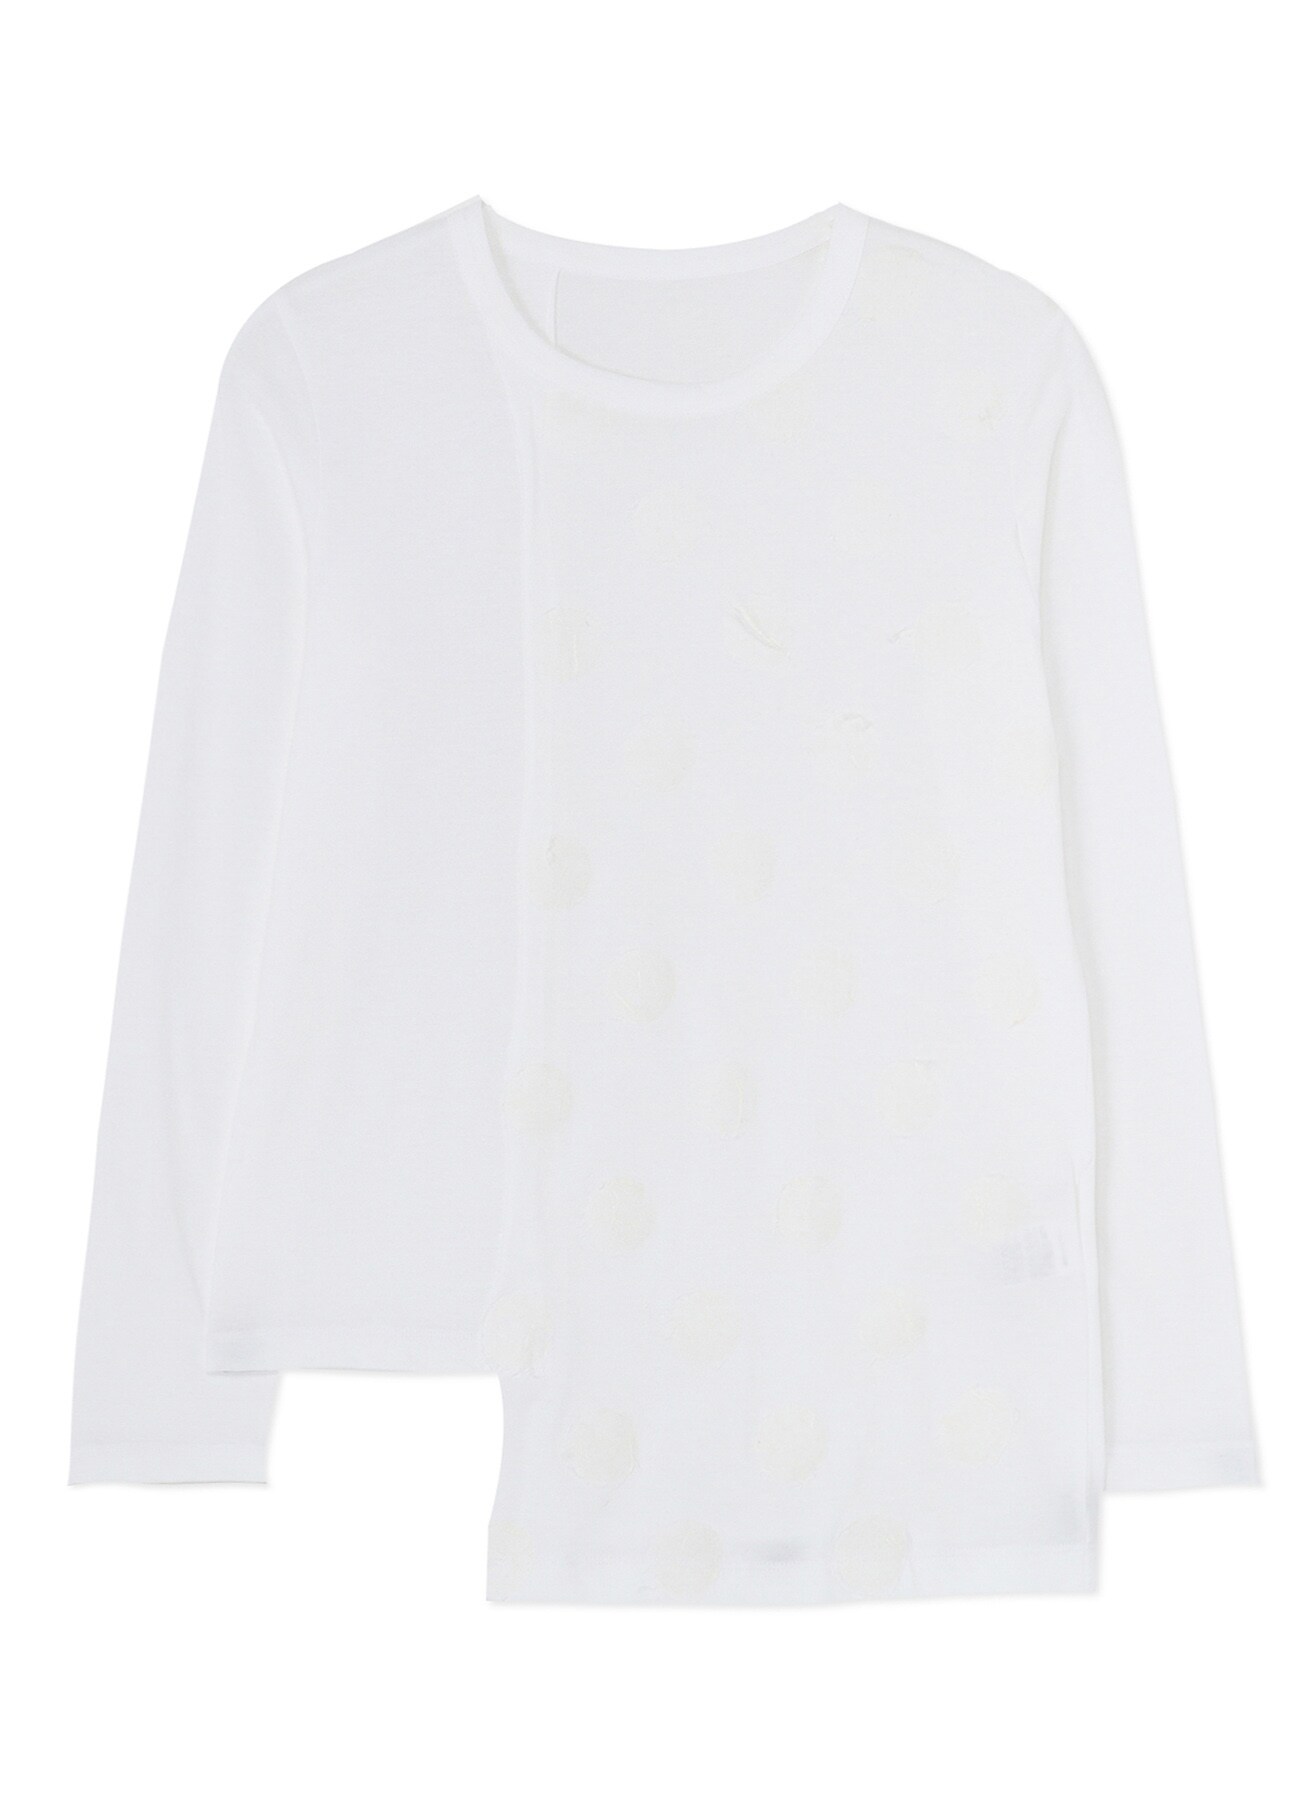 COTTON JERSEY LONG SLEEVE PANEL T-SHIRT(S Off White): Y's｜THE